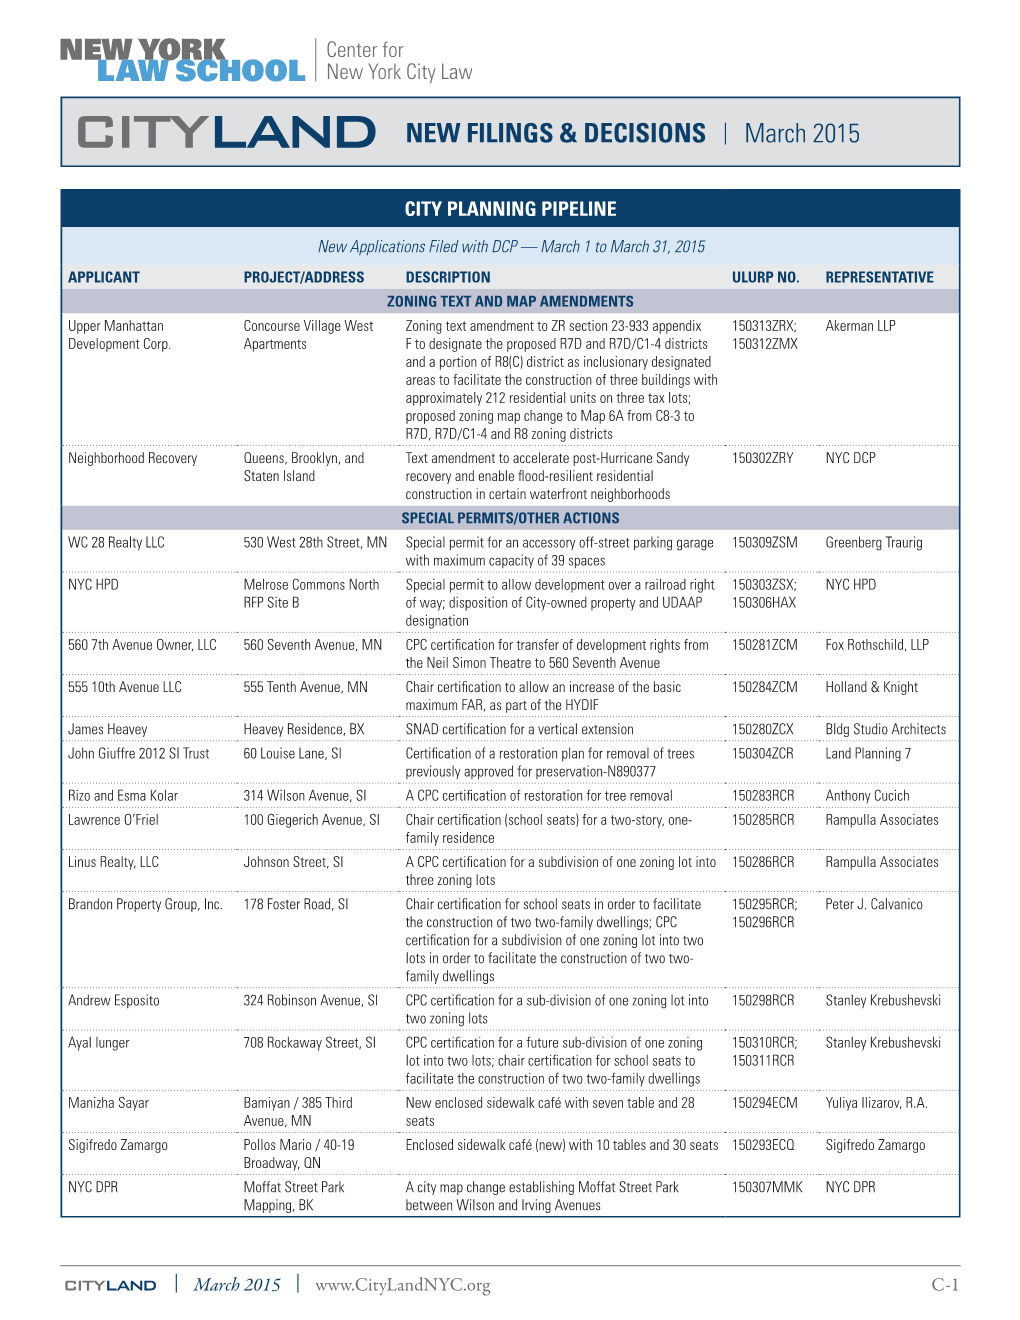 CITYLAND NEW FILINGS & DECISIONS | March 2015